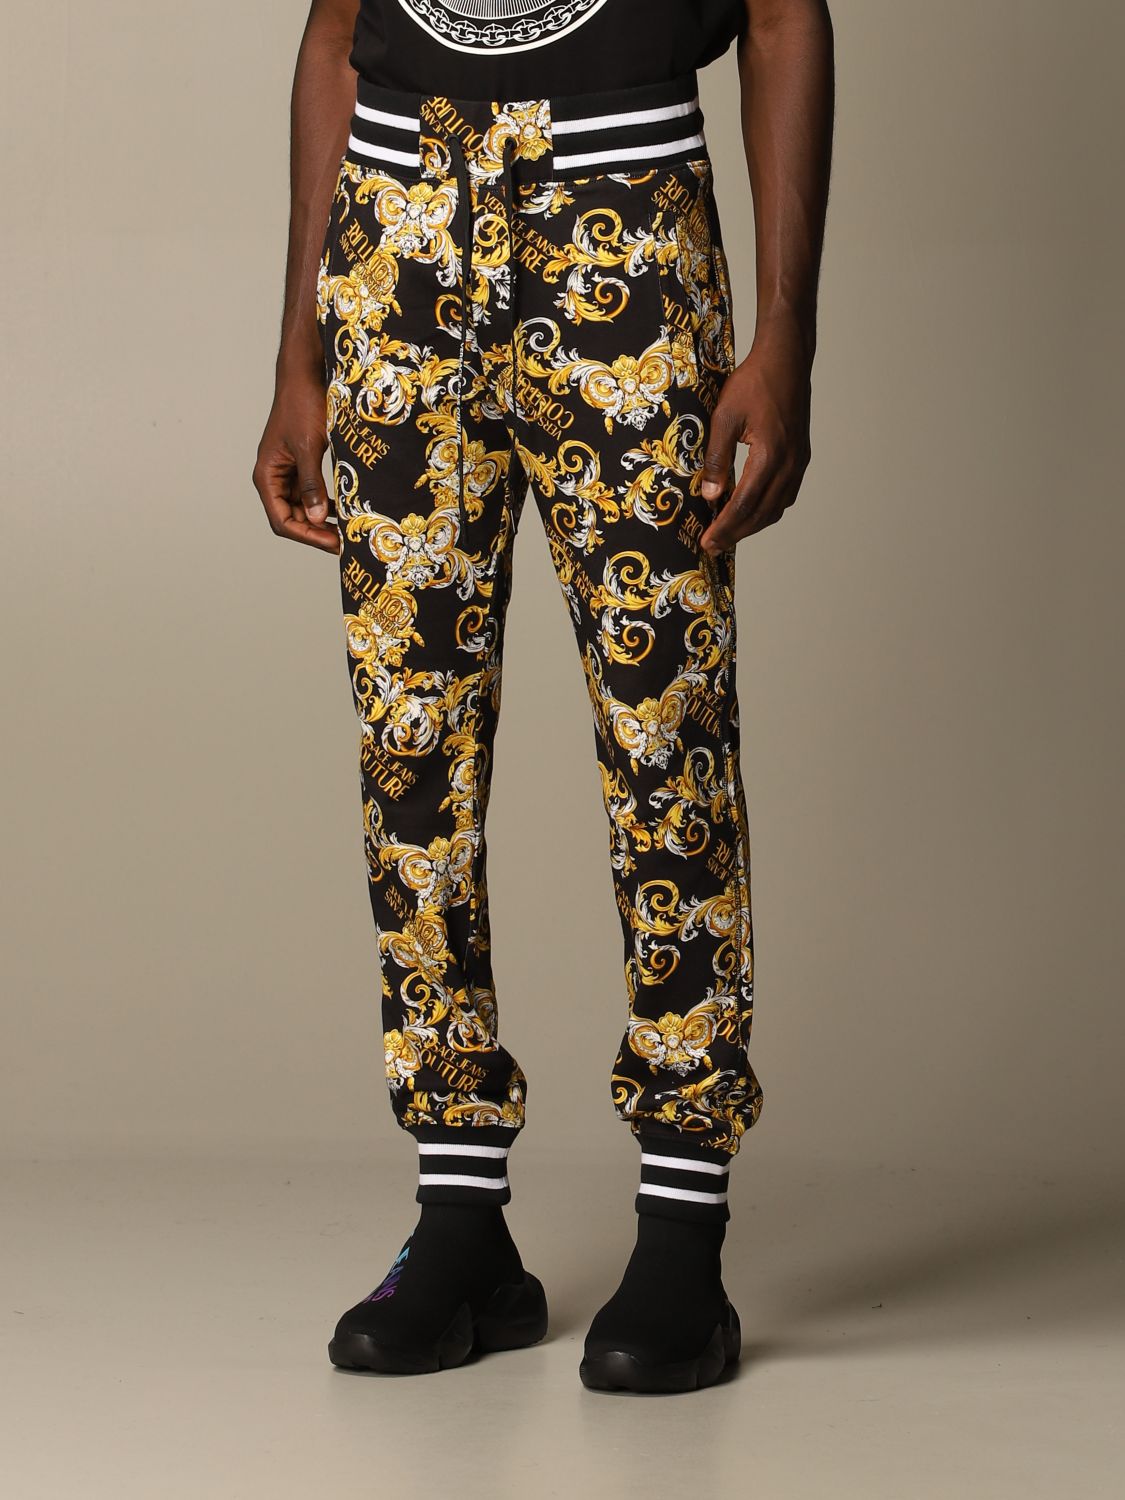 VERSACE JEANS COUTURE: jogging trousers with baroque pattern | Pants ...